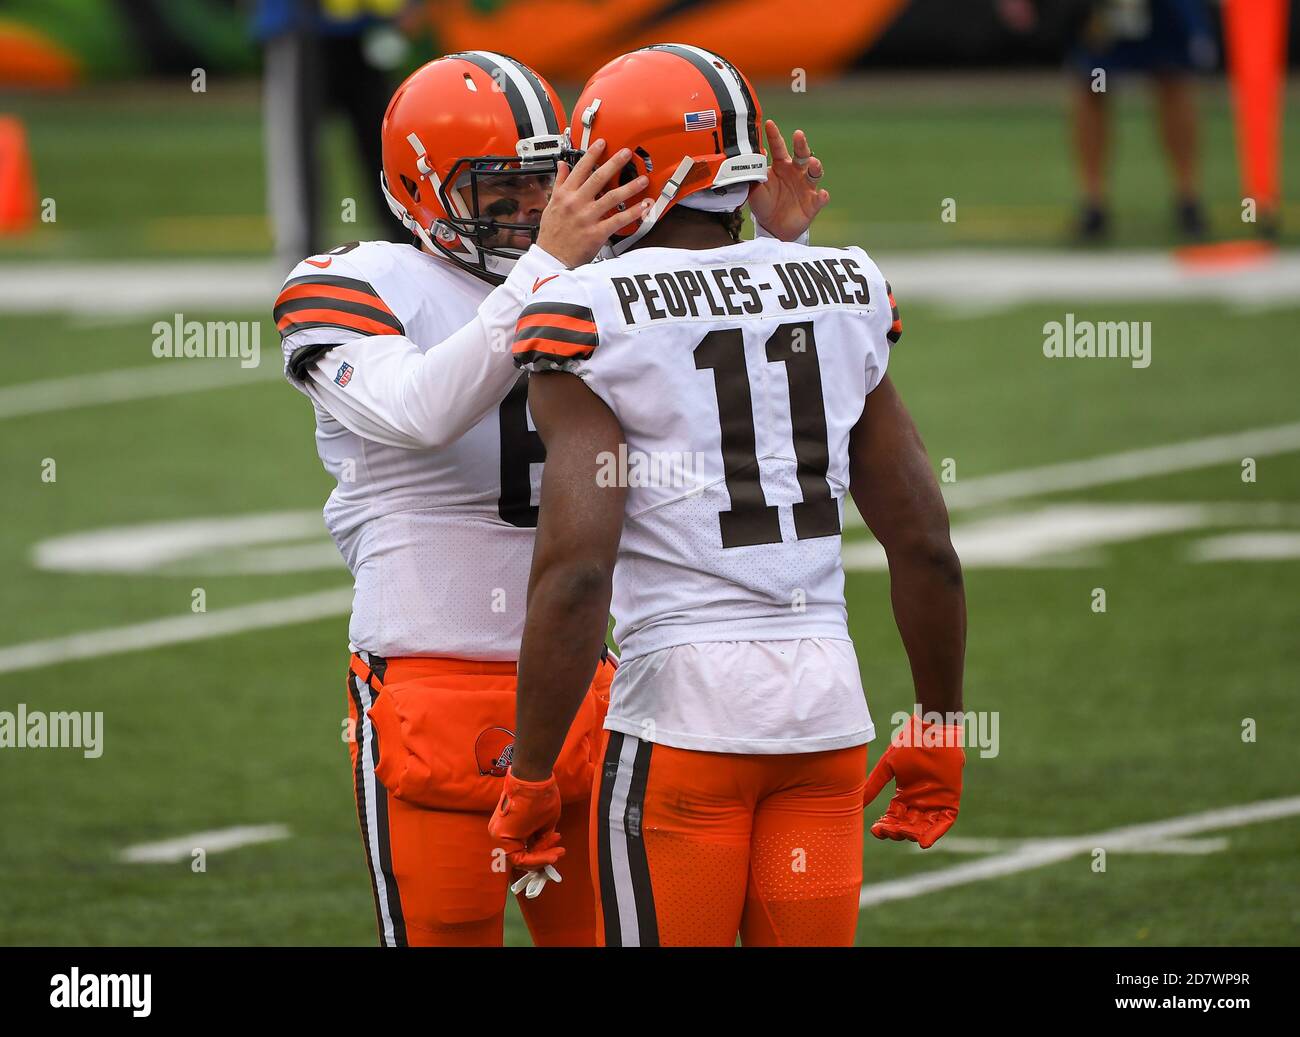 Cincinnati, OH, USA. 25th Oct, 2020. Donovan Peoples-Jones #11 of the Cleveland Browns celebrates with Baker Mayfield #6 of the Cleveland Browns after the two connected for the game winning touchdown during NFL football game action between the Cleveland Browns and the Cincinnati Bengals at Paul Brown Stadium on October 25, 2020 in Cincinnati, OH. Adam Lacy/CSM/Alamy Live News Stock Photo